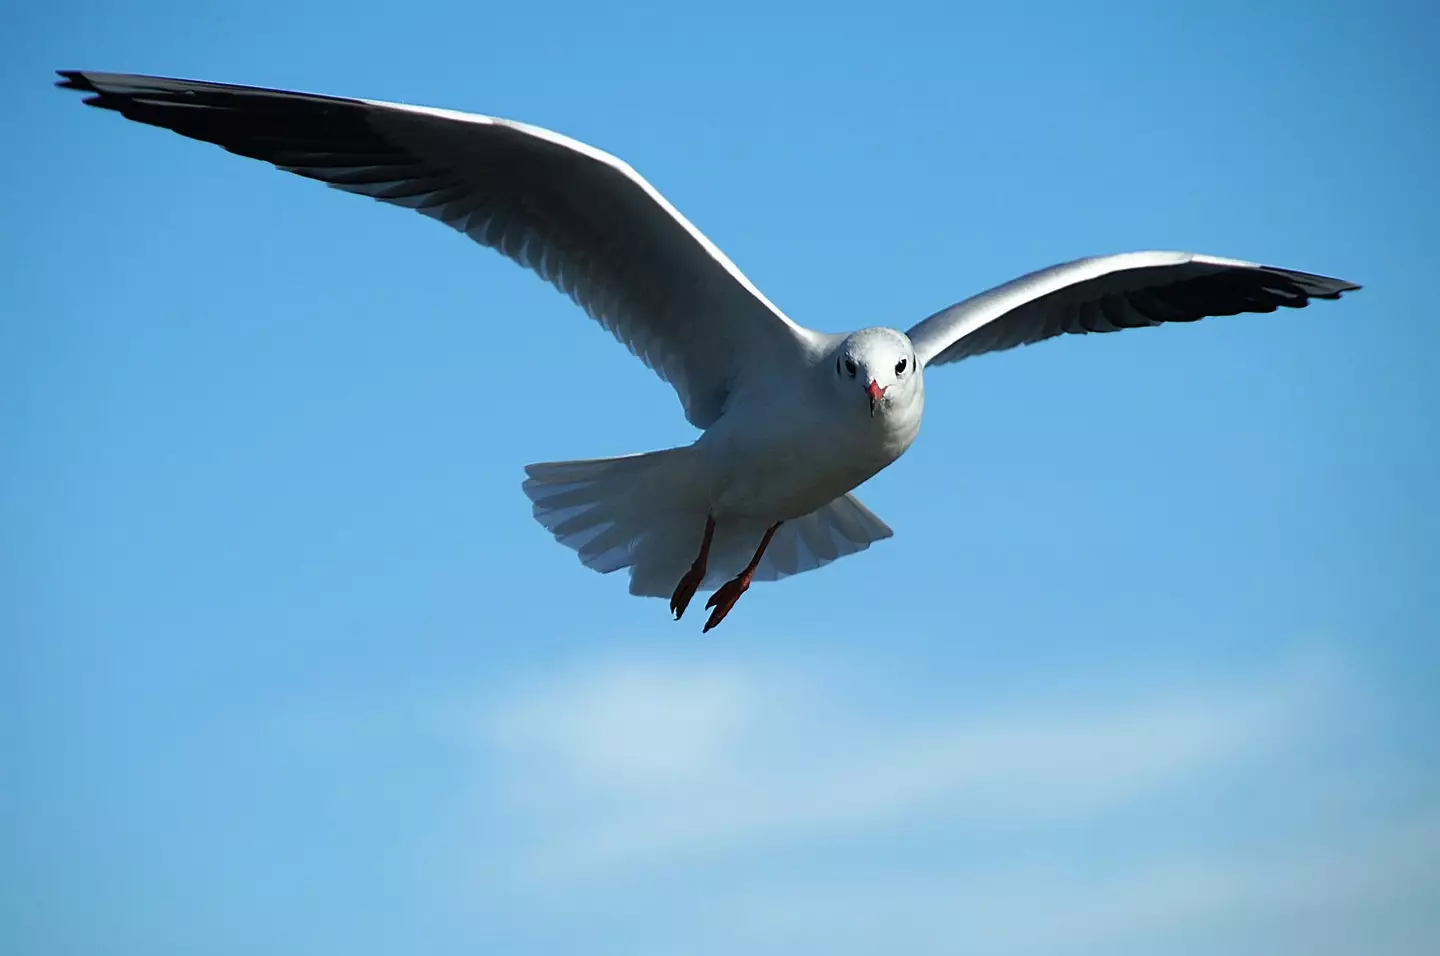 Seagulls are said to go 'mad' for the flying ants.